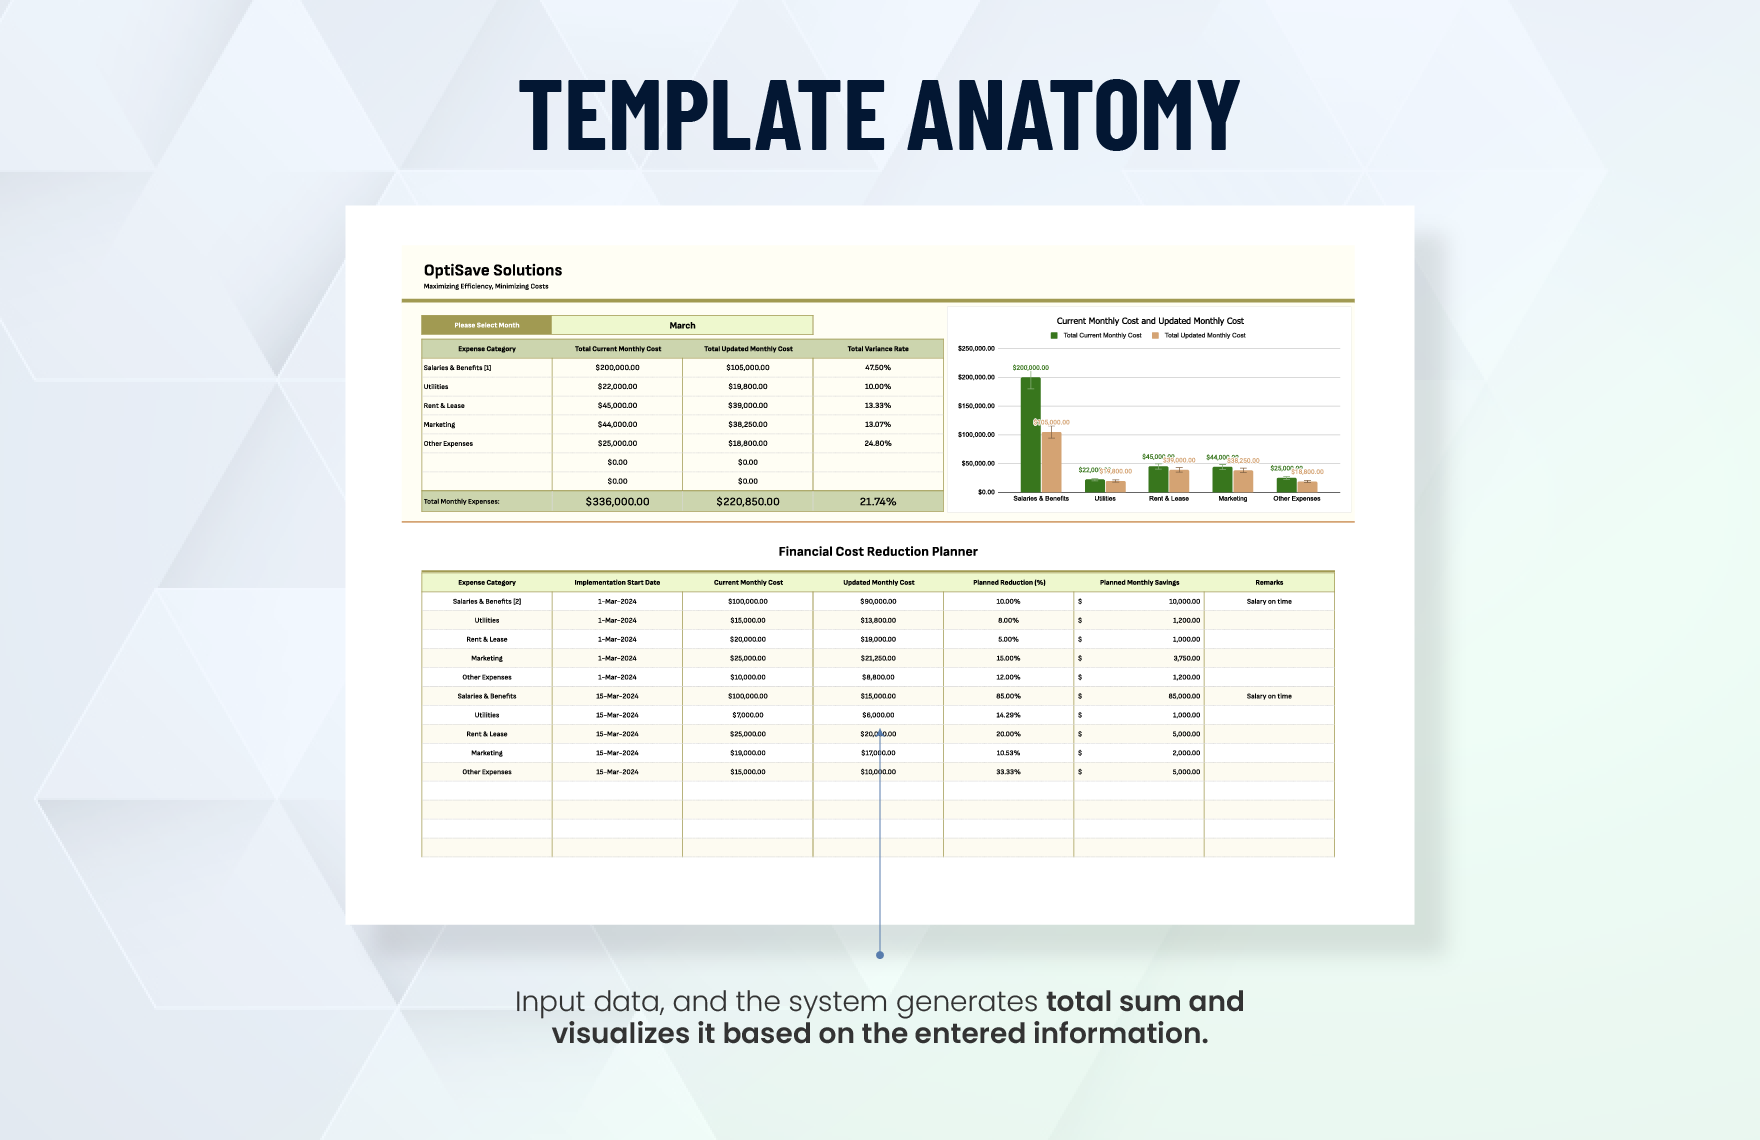 Financial Cost Reduction Planner Template